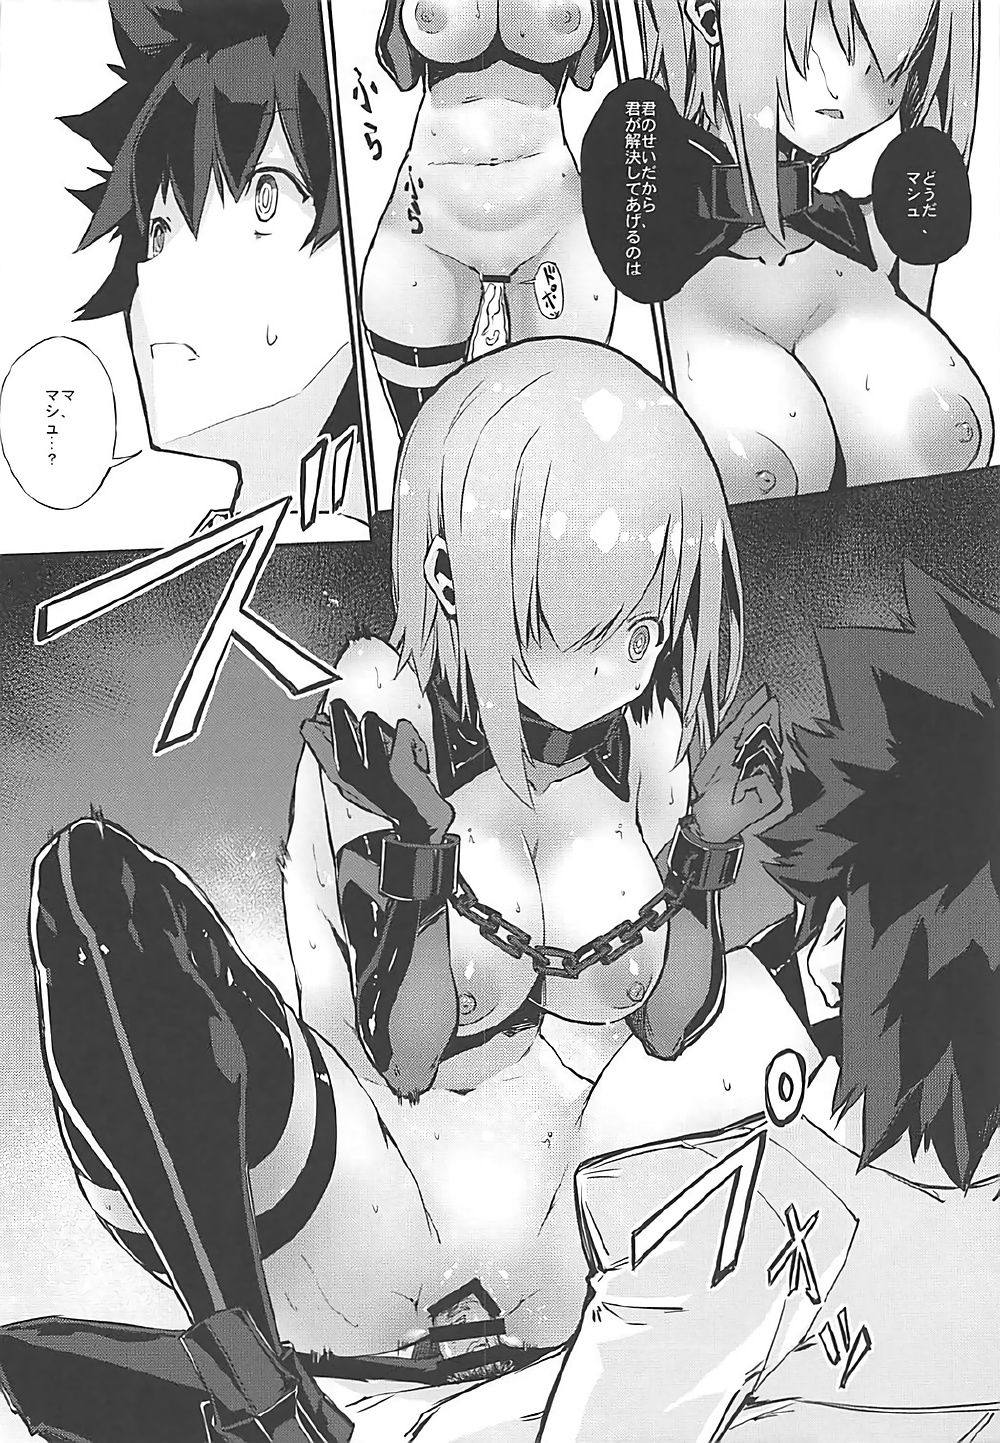 (C92) [Kenja Time (Zutta)] Bad End Catharsis Vol. 7 (Fate/Grand Order) page 15 full